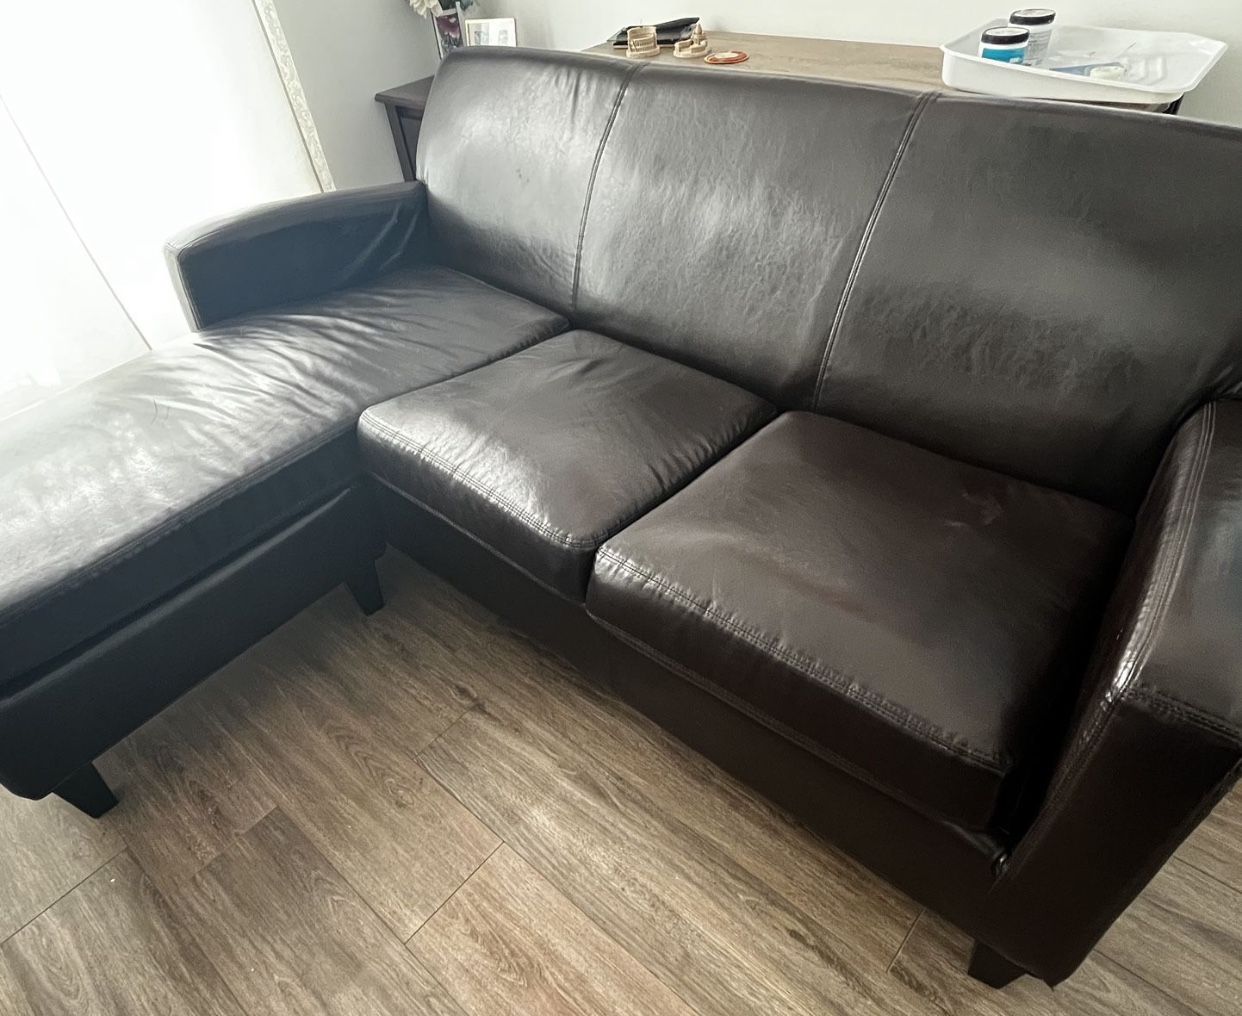 Black Leather couch